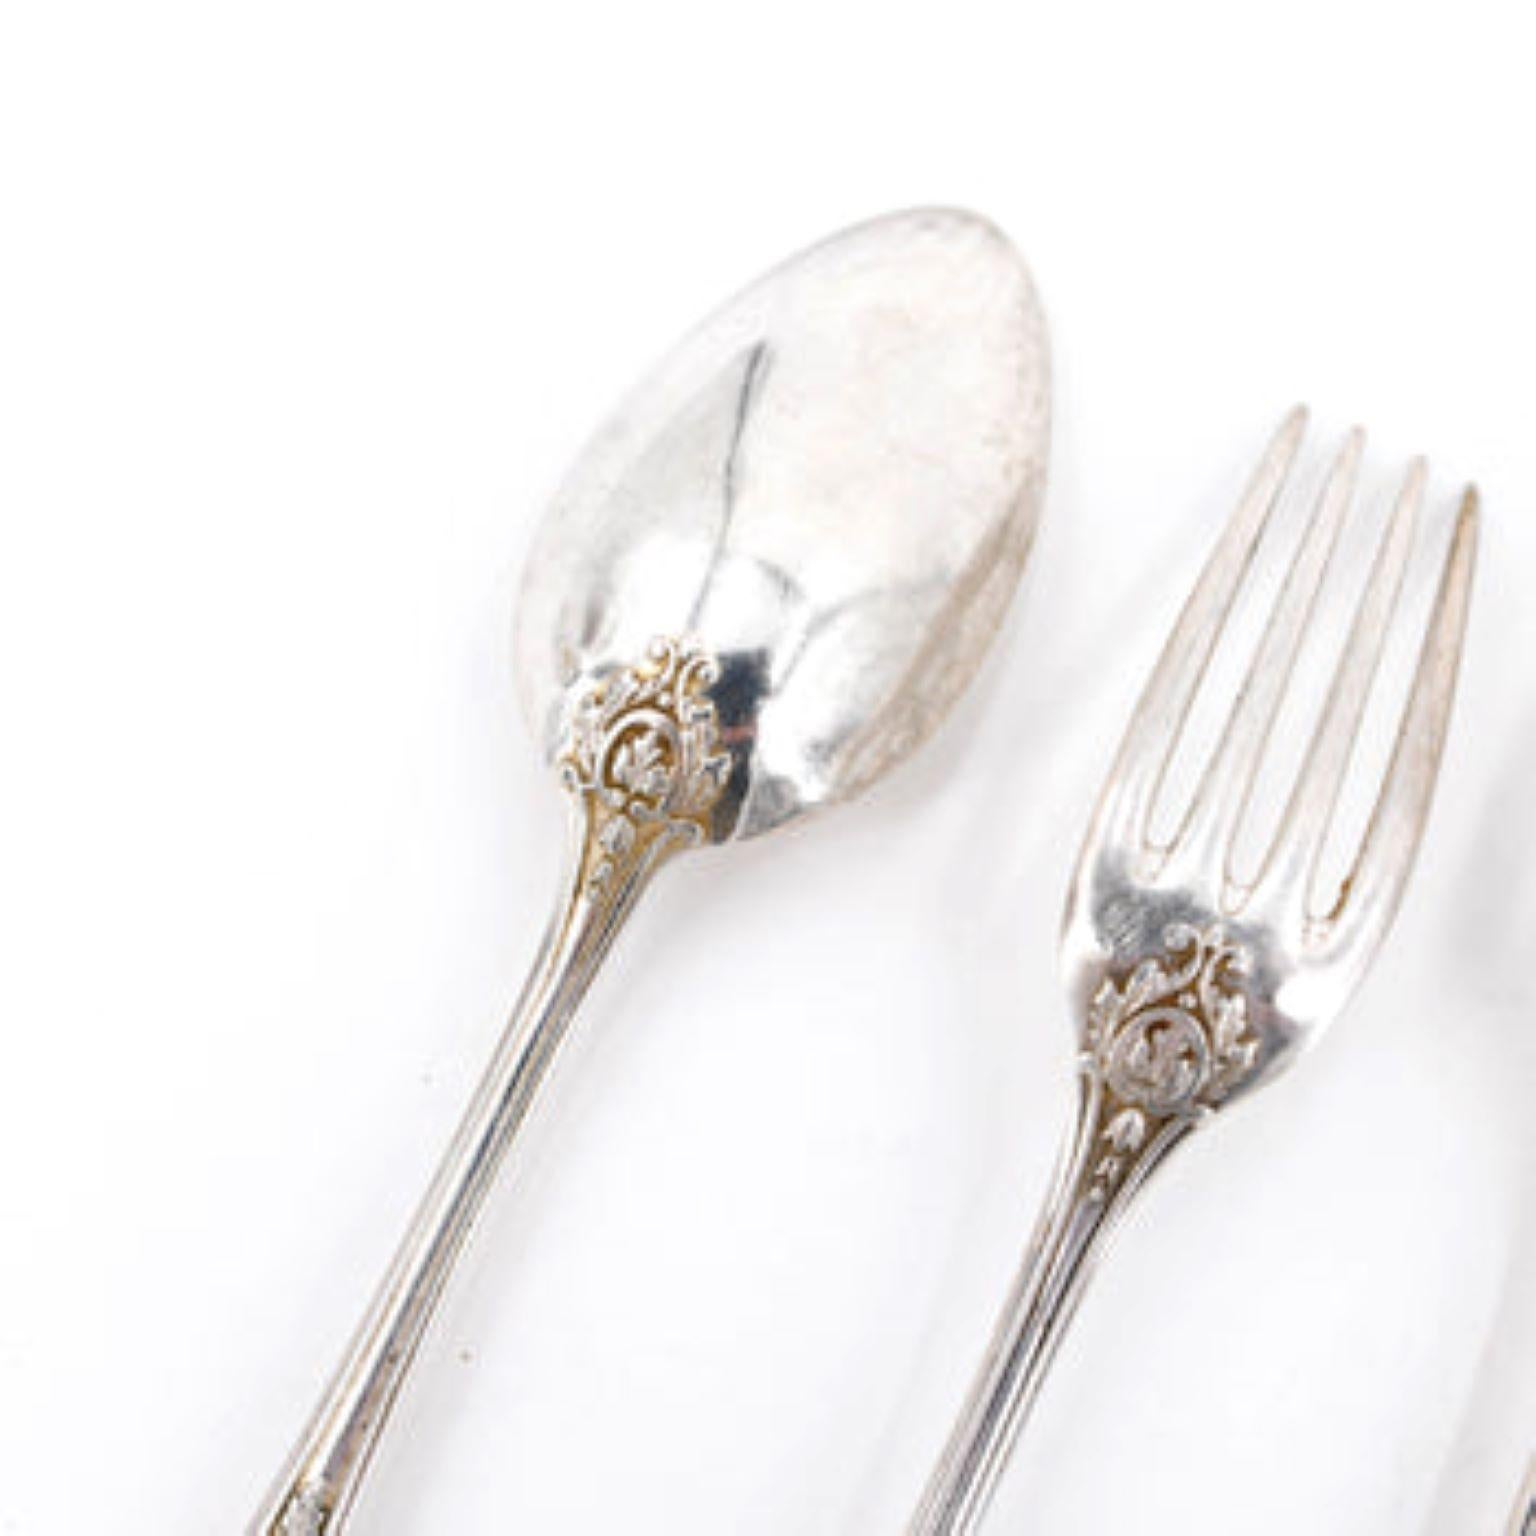 Circa 1860, Paris, France. This 99-piece solid silver set features elegant craftsmanship with crest detail on each utensil.
Measurement is for the knife.